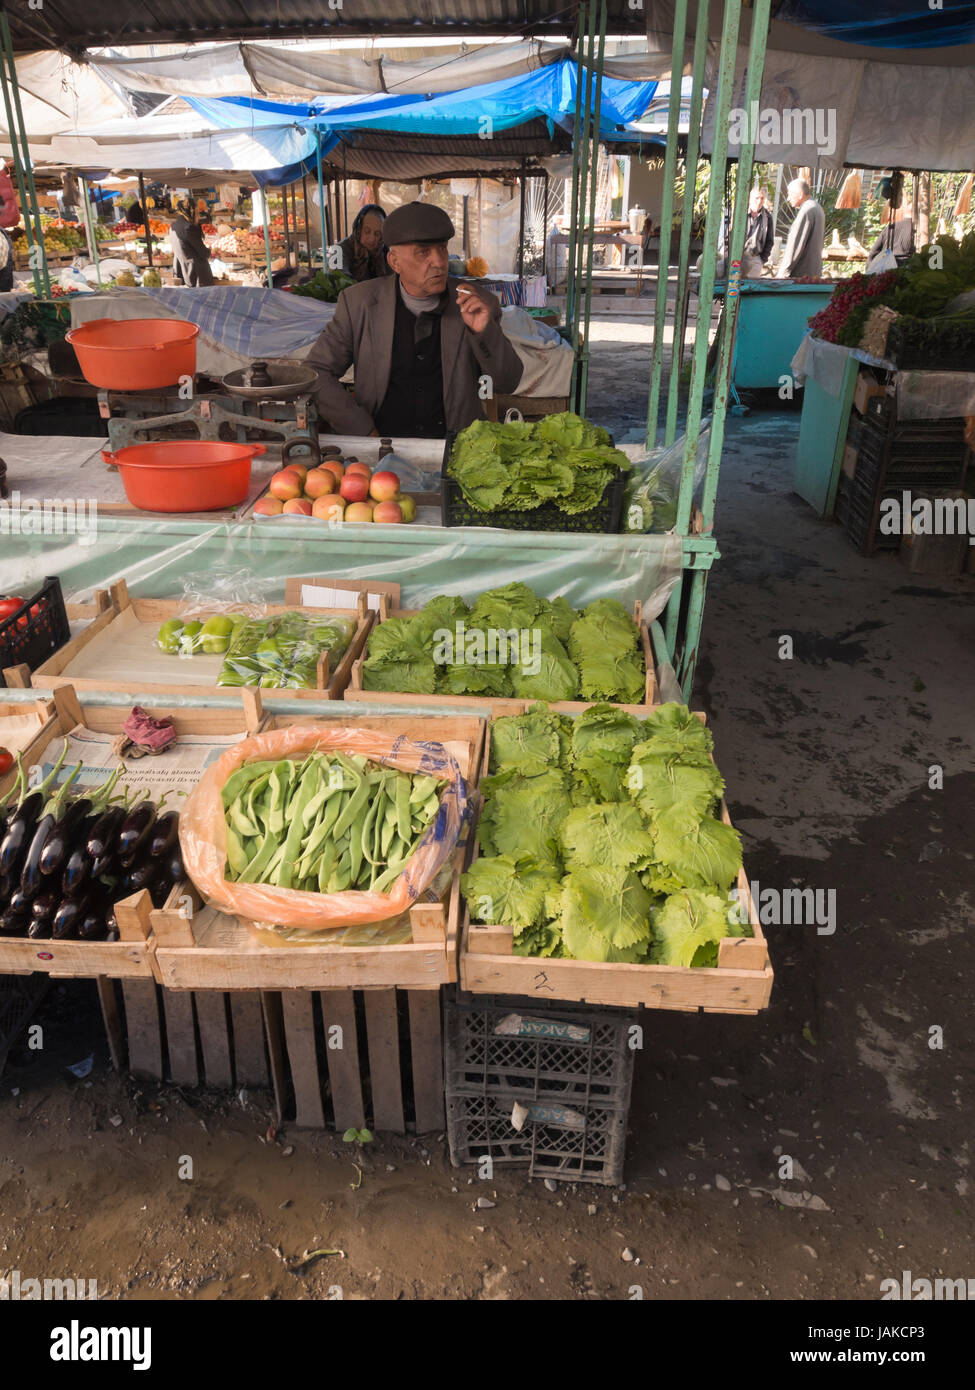 The daily outdoors market in Şəki (transcribed Shaki or Sheki) in northern Azerbaijan offers produce from a fertile agricultural region, vegetables Stock Photo